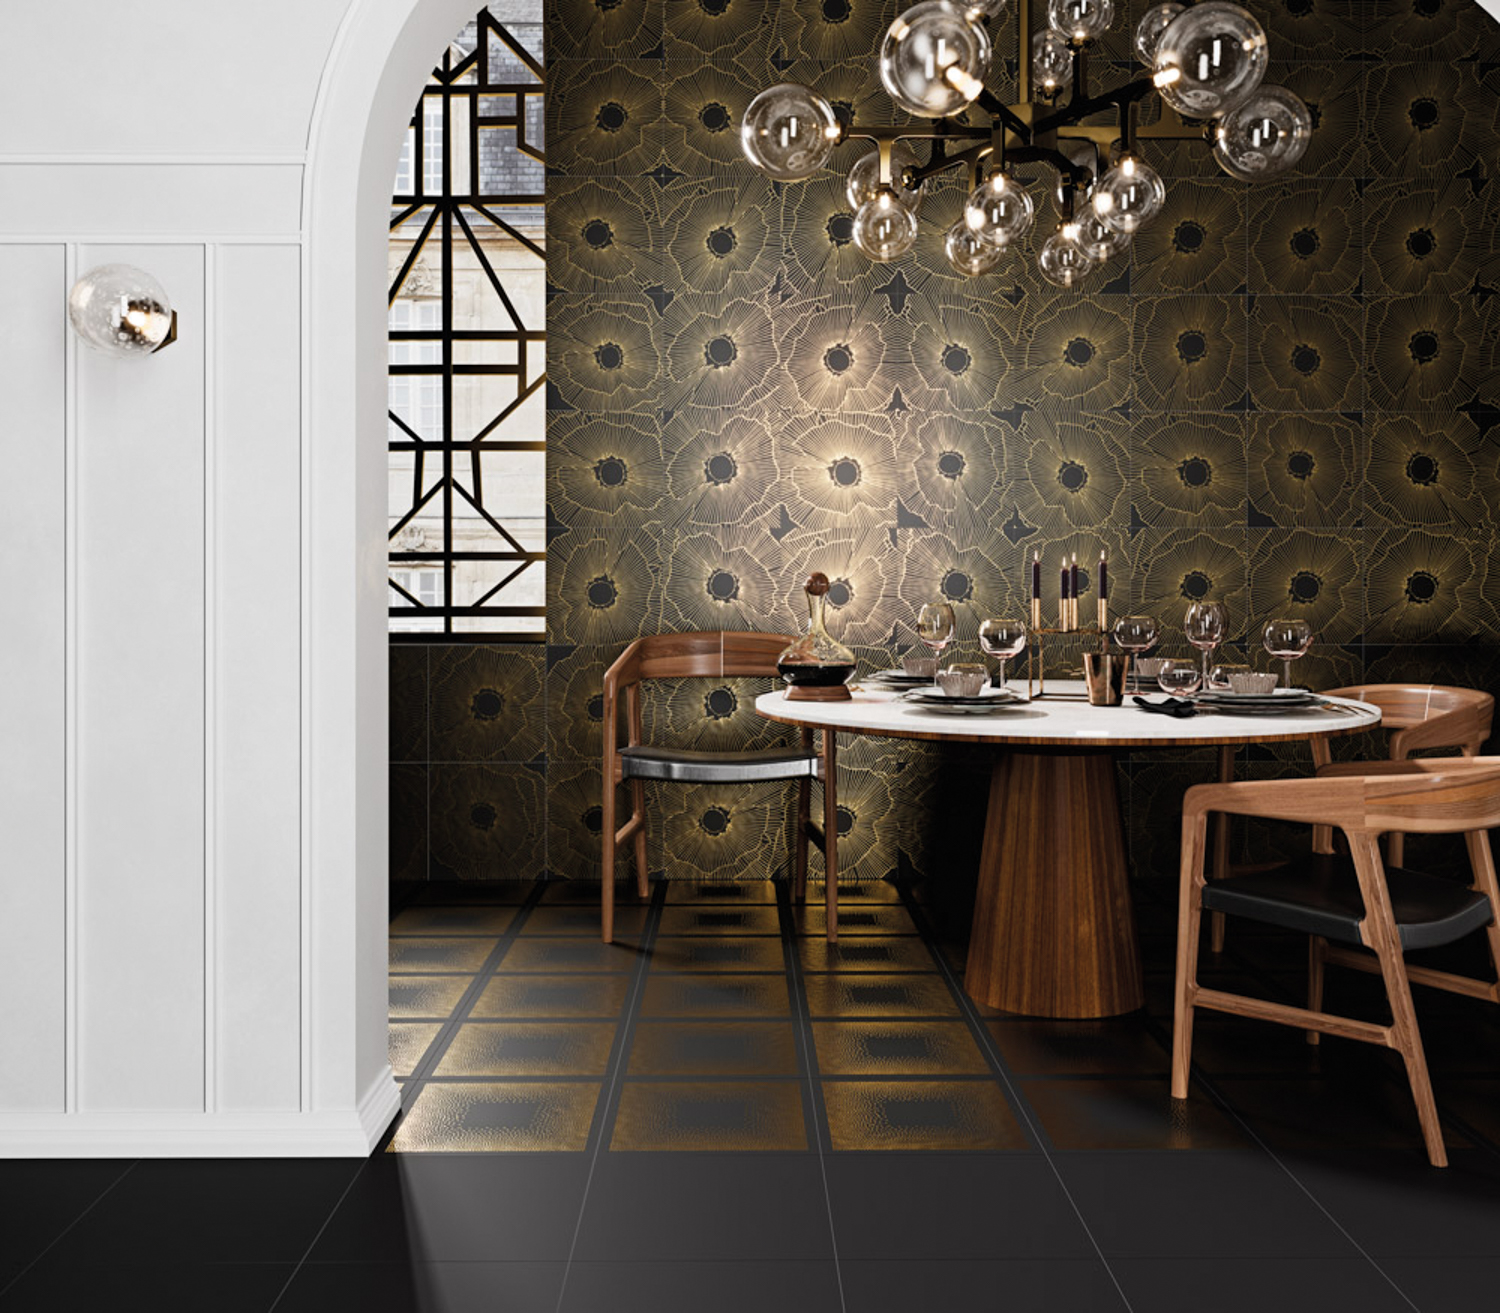 dining room with table, chairs, chandelier and Black Spritz tile by Ceramicas Aparici on wall